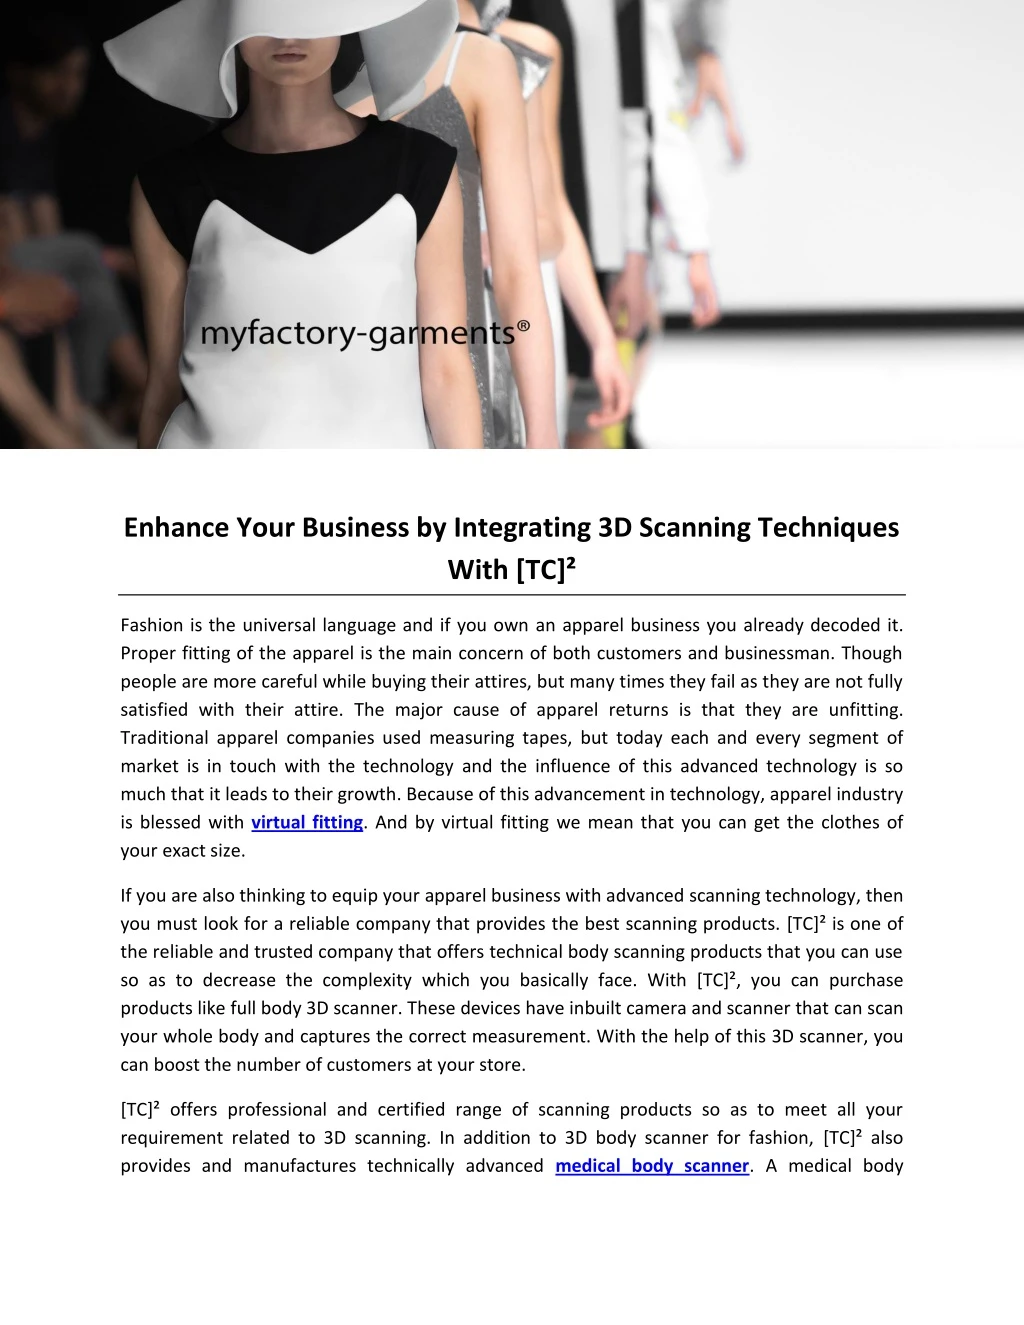 enhance your business by integrating 3d scanning